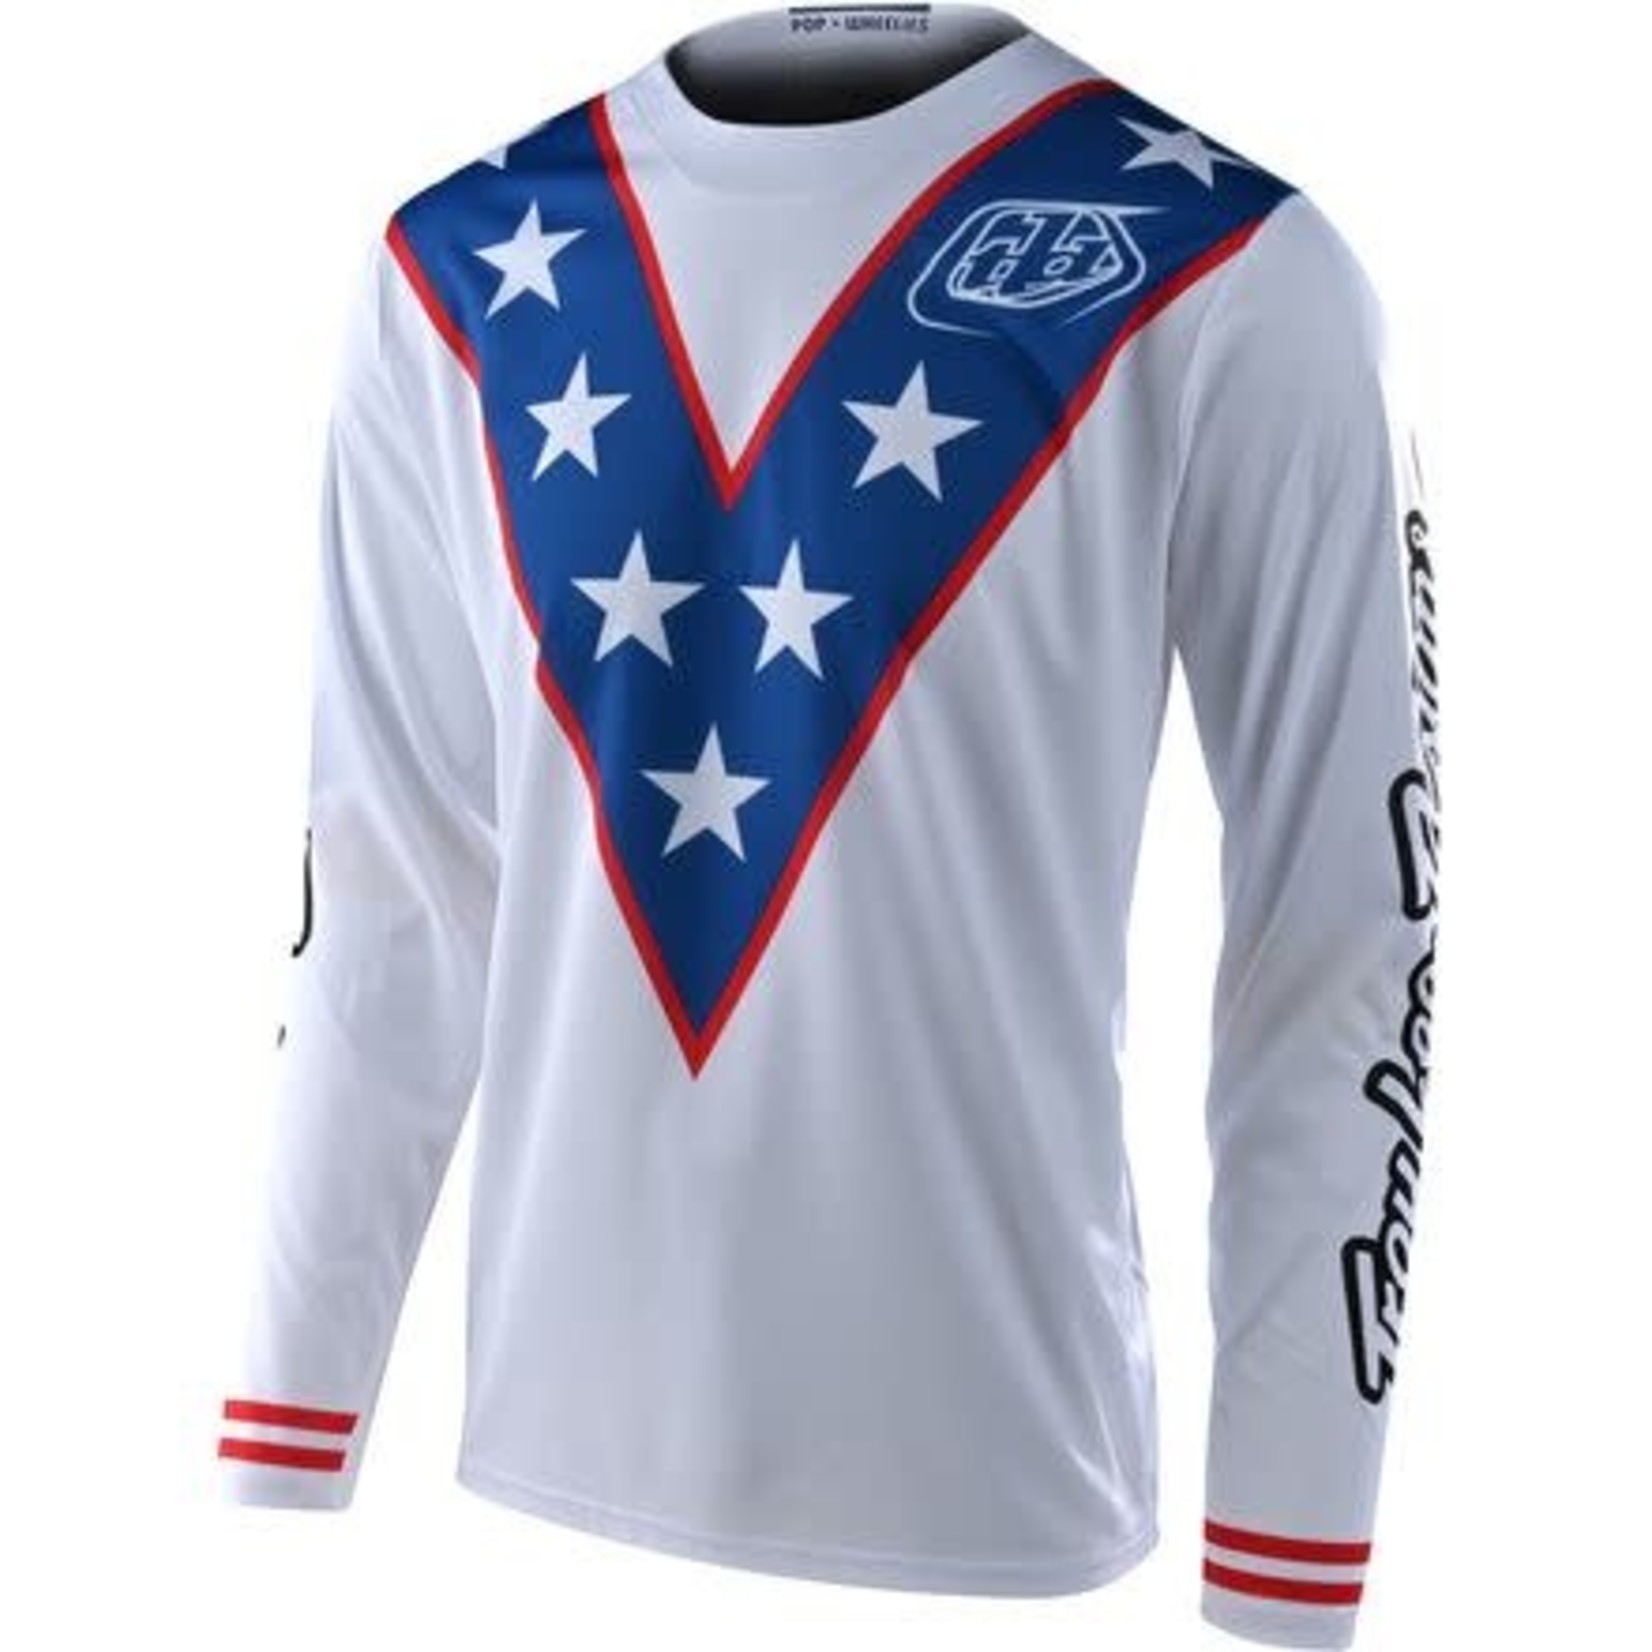 TROY LEE DESIGNS Gp Jersey, Evel White